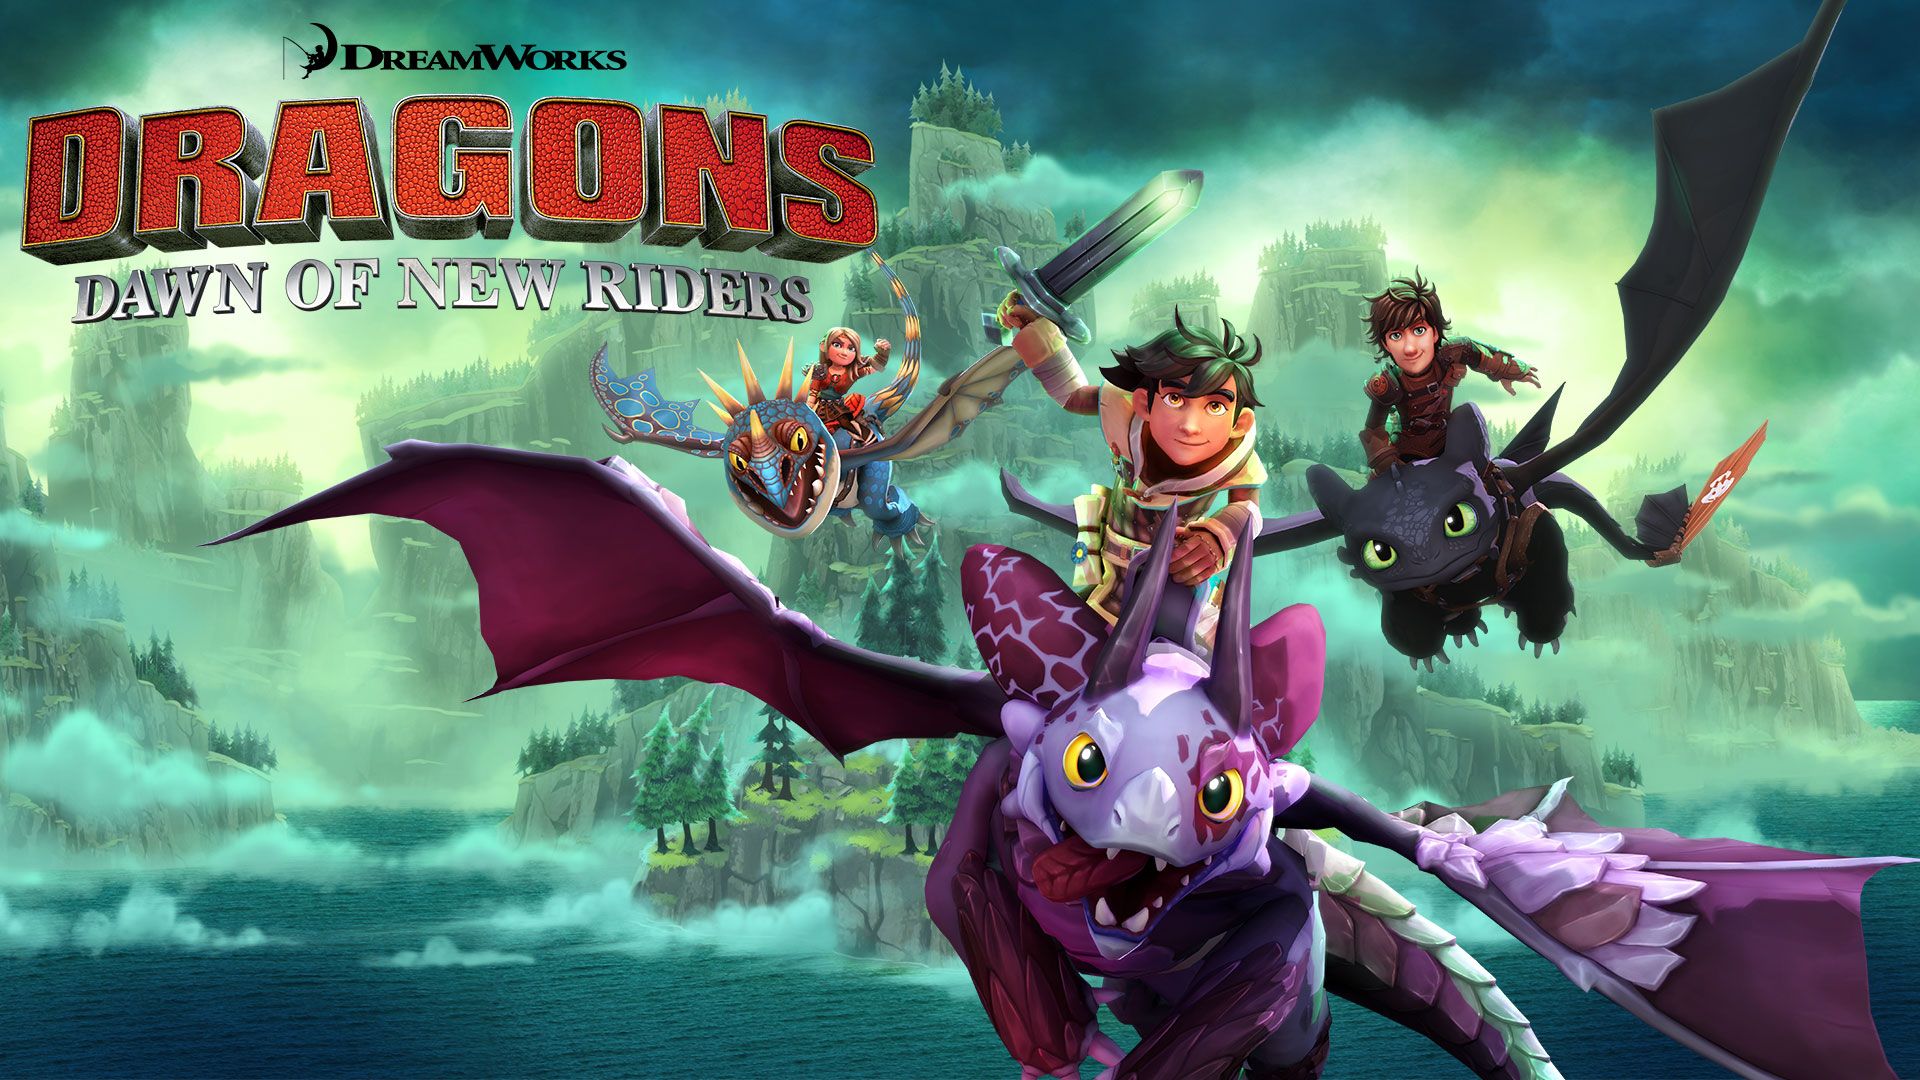 DreamWorks Dragons Dawn of New Riders for Nintendo Switch